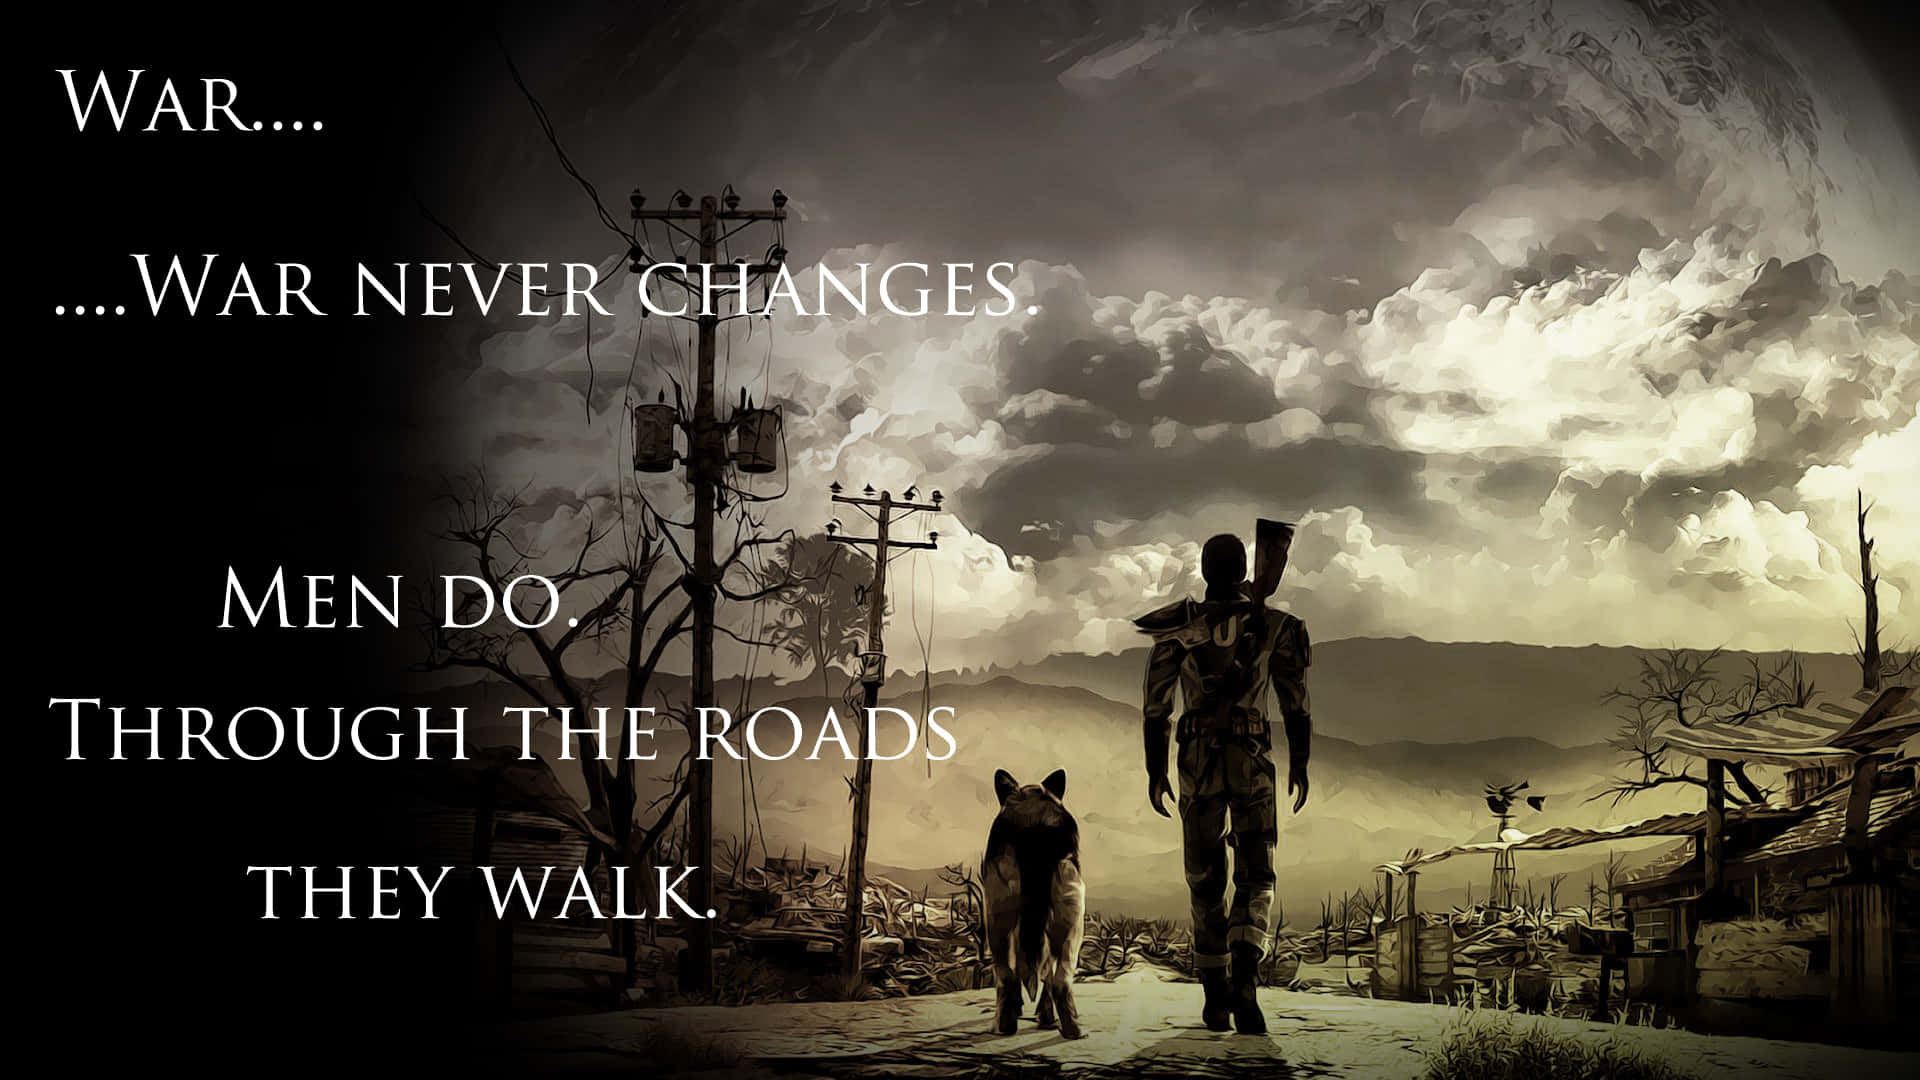 Explore a post-apocalyptic world in the critically acclaimed Fallout video game series. Wallpaper